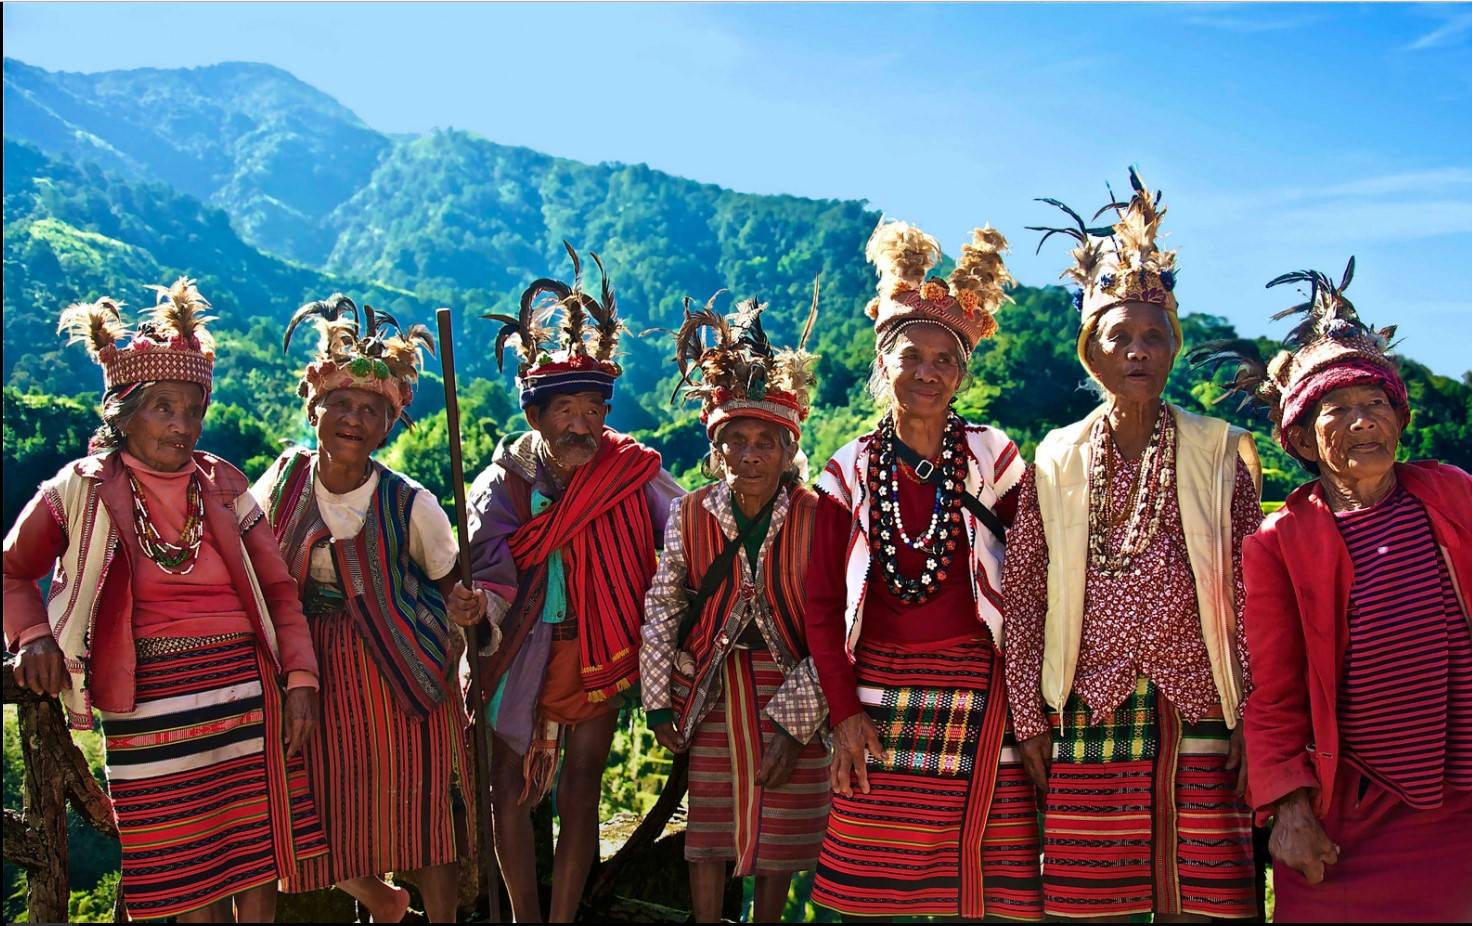 do headhunters still exist in tribes in the philippines